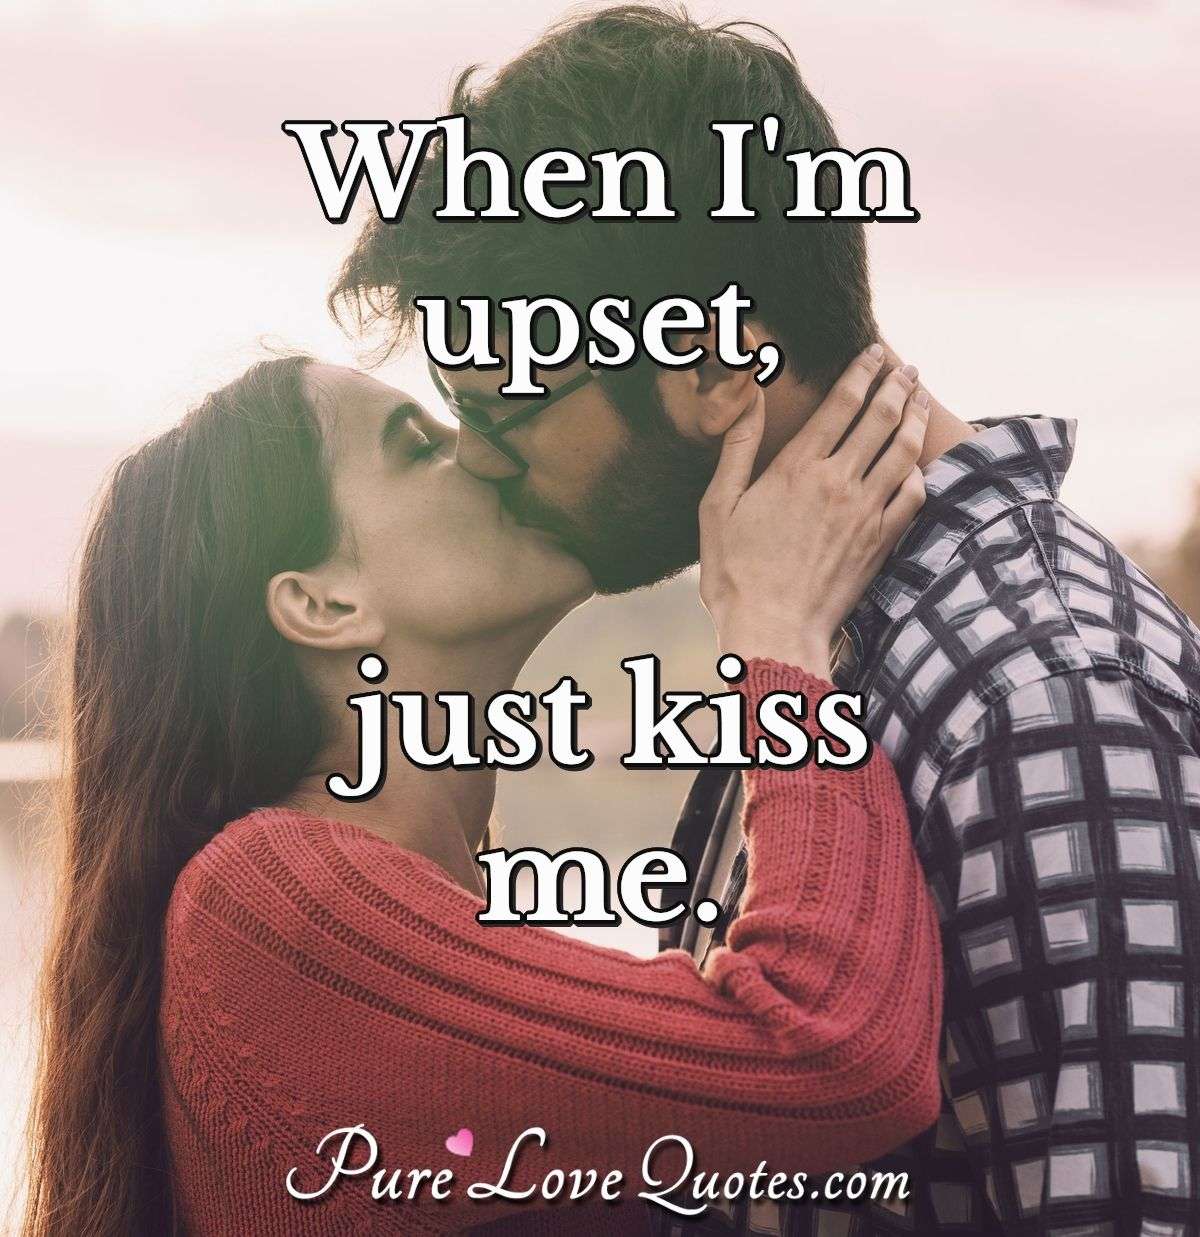 When I'm upset, just kiss me. - Anonymous